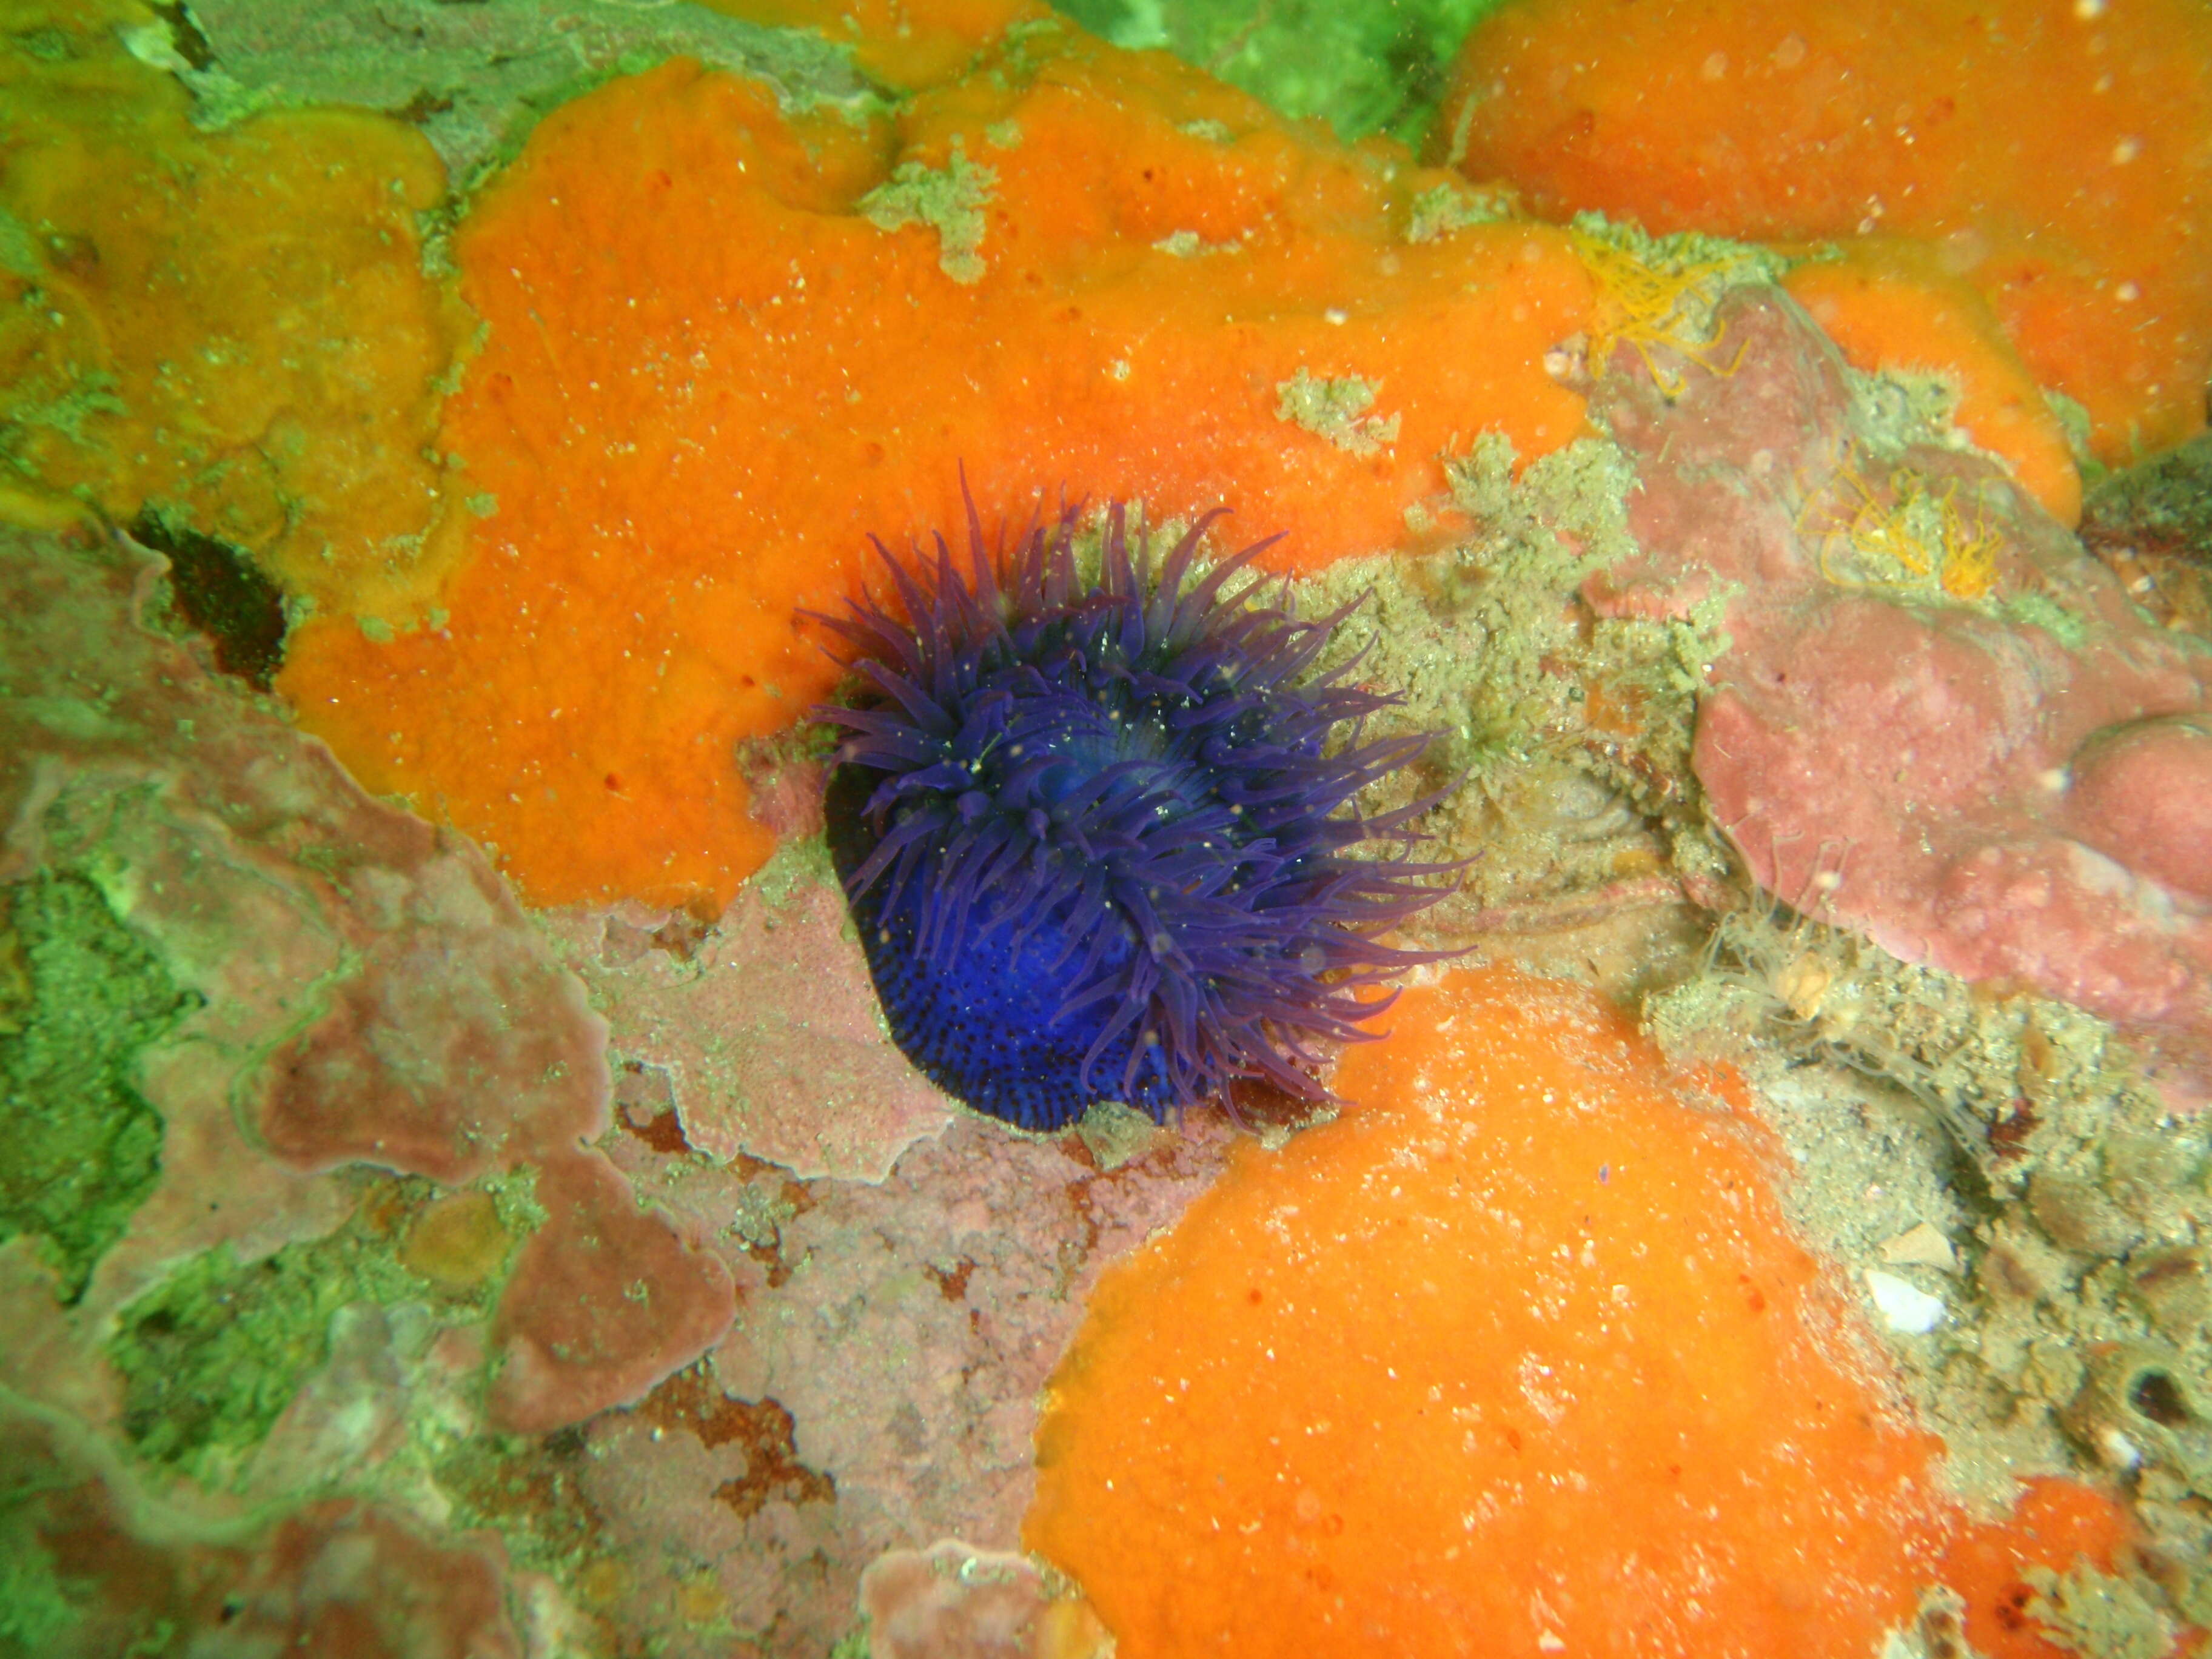 Image of Knobbly anemone